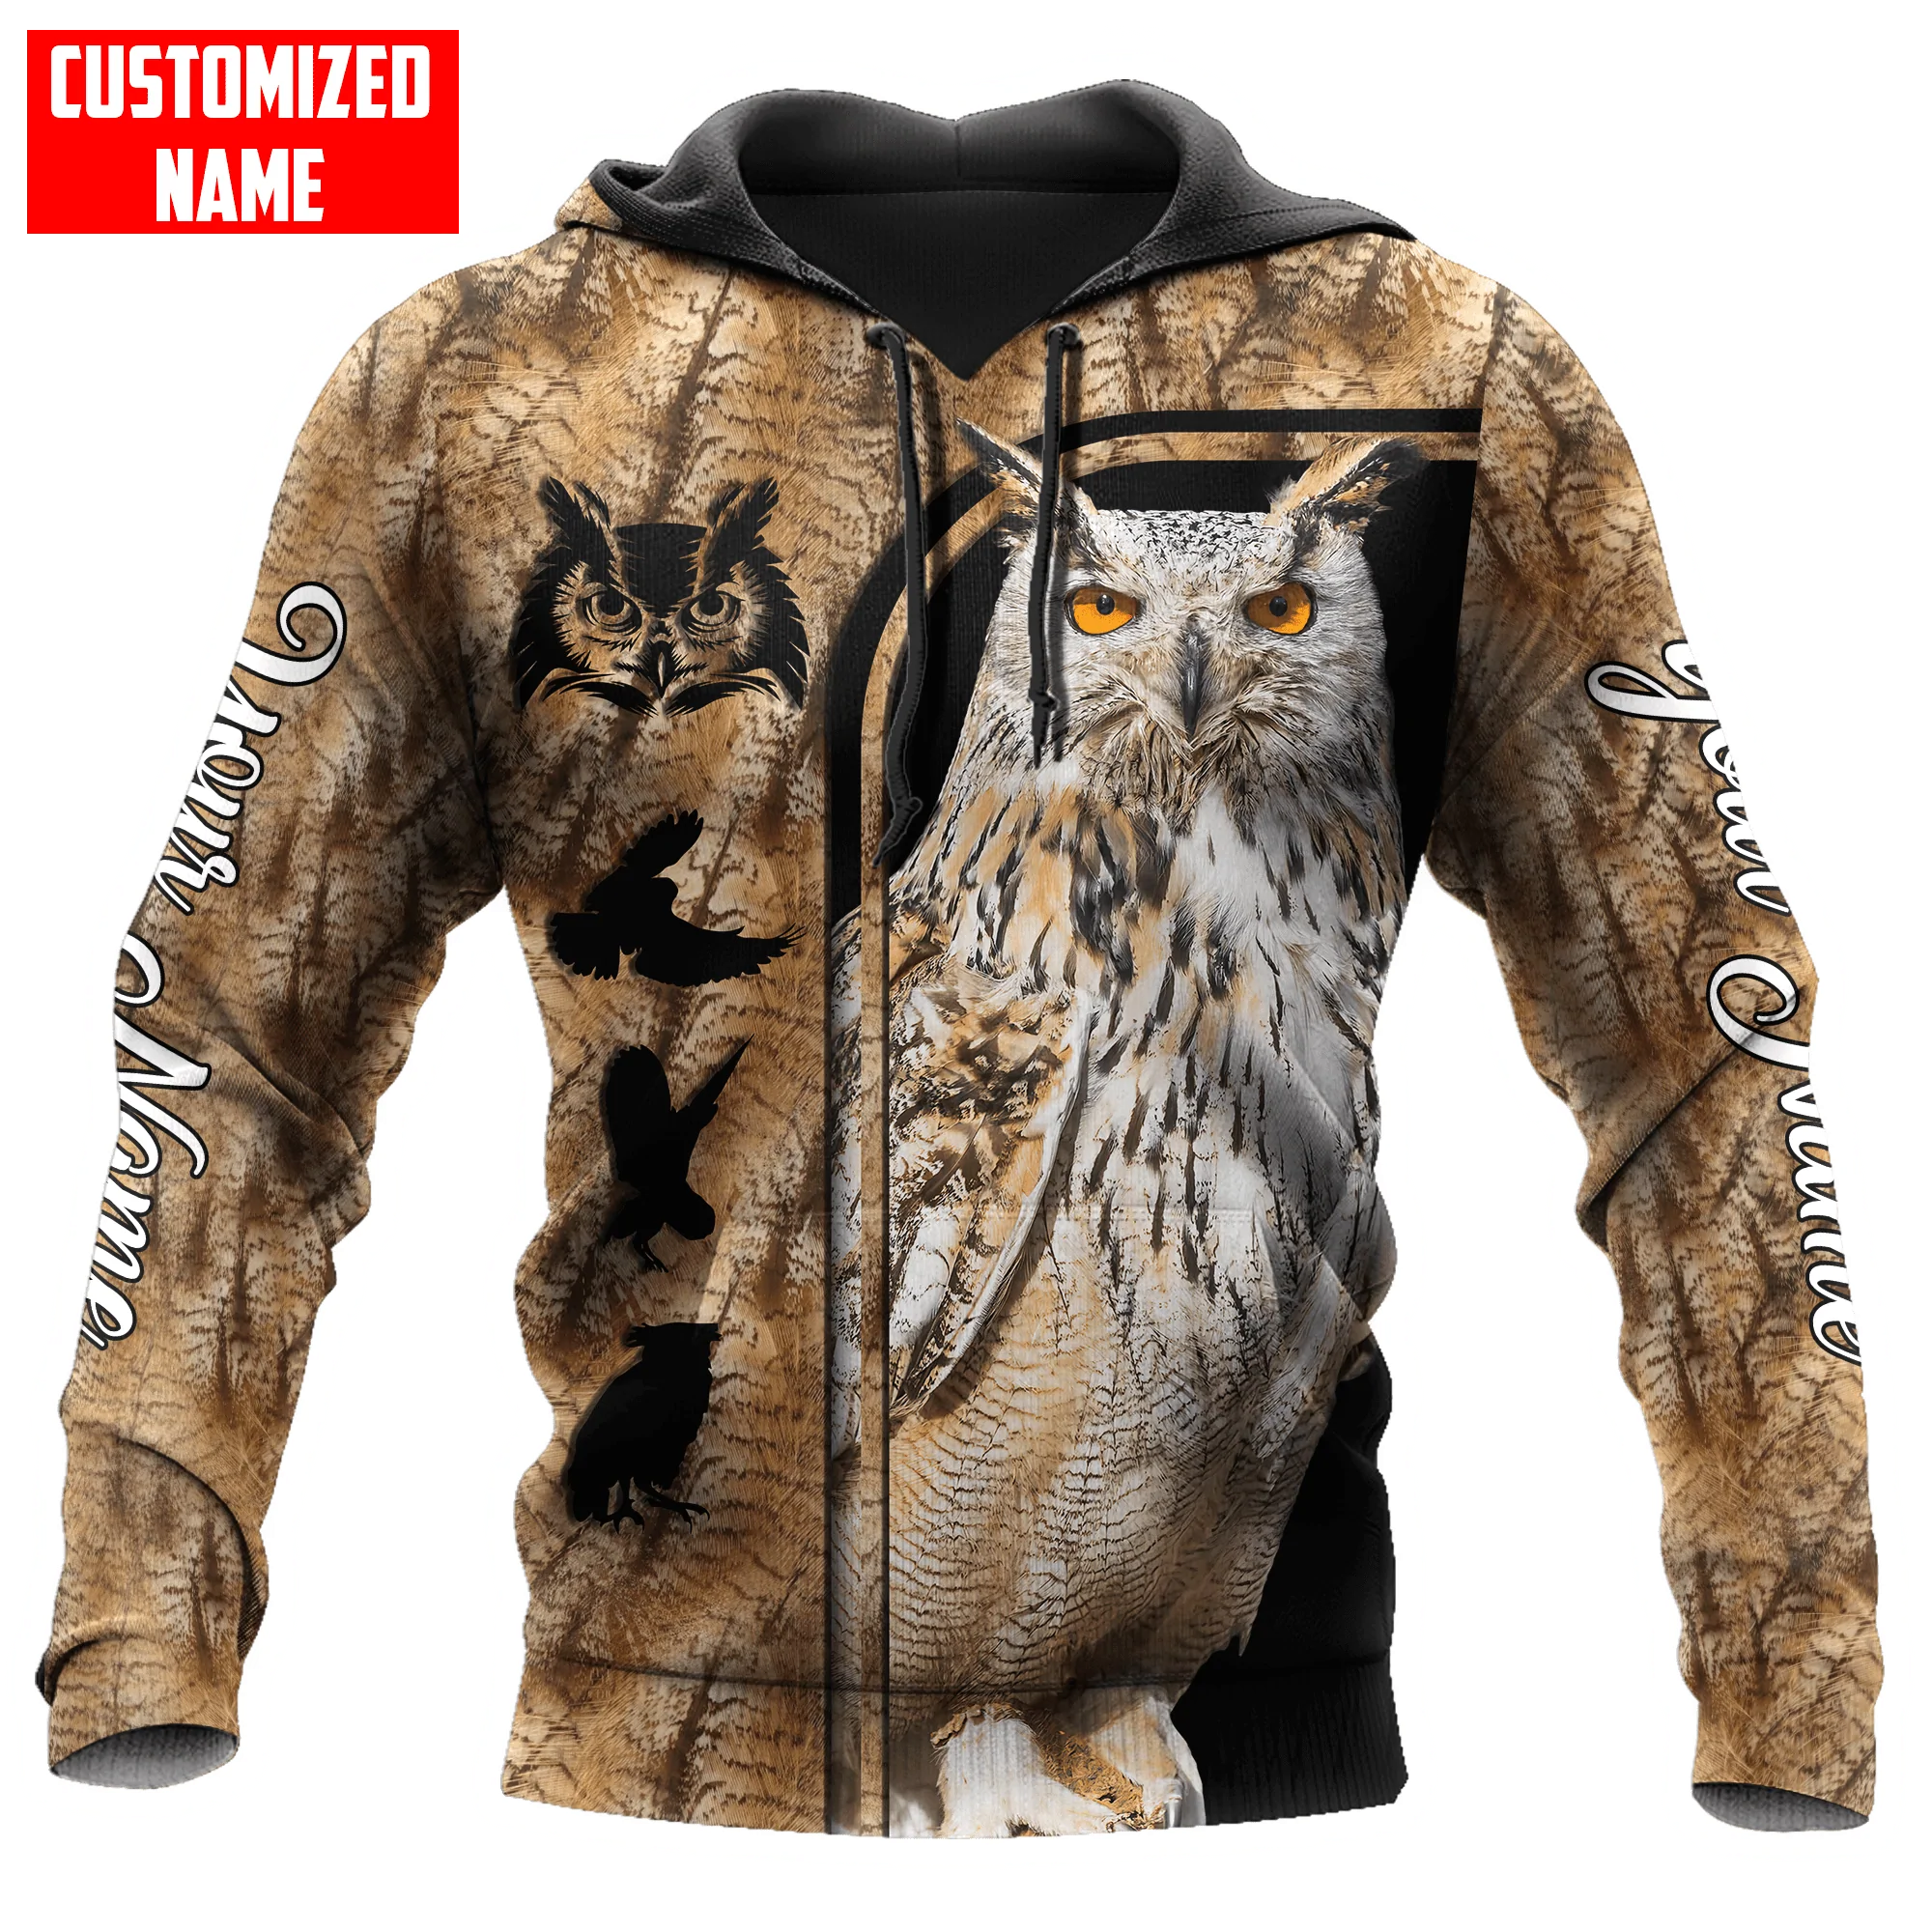 Customized Name Owl Hunting Hoodie 3D All Over Print/ Owl Hunter Hoodies/ Owl Hunting Hoodies